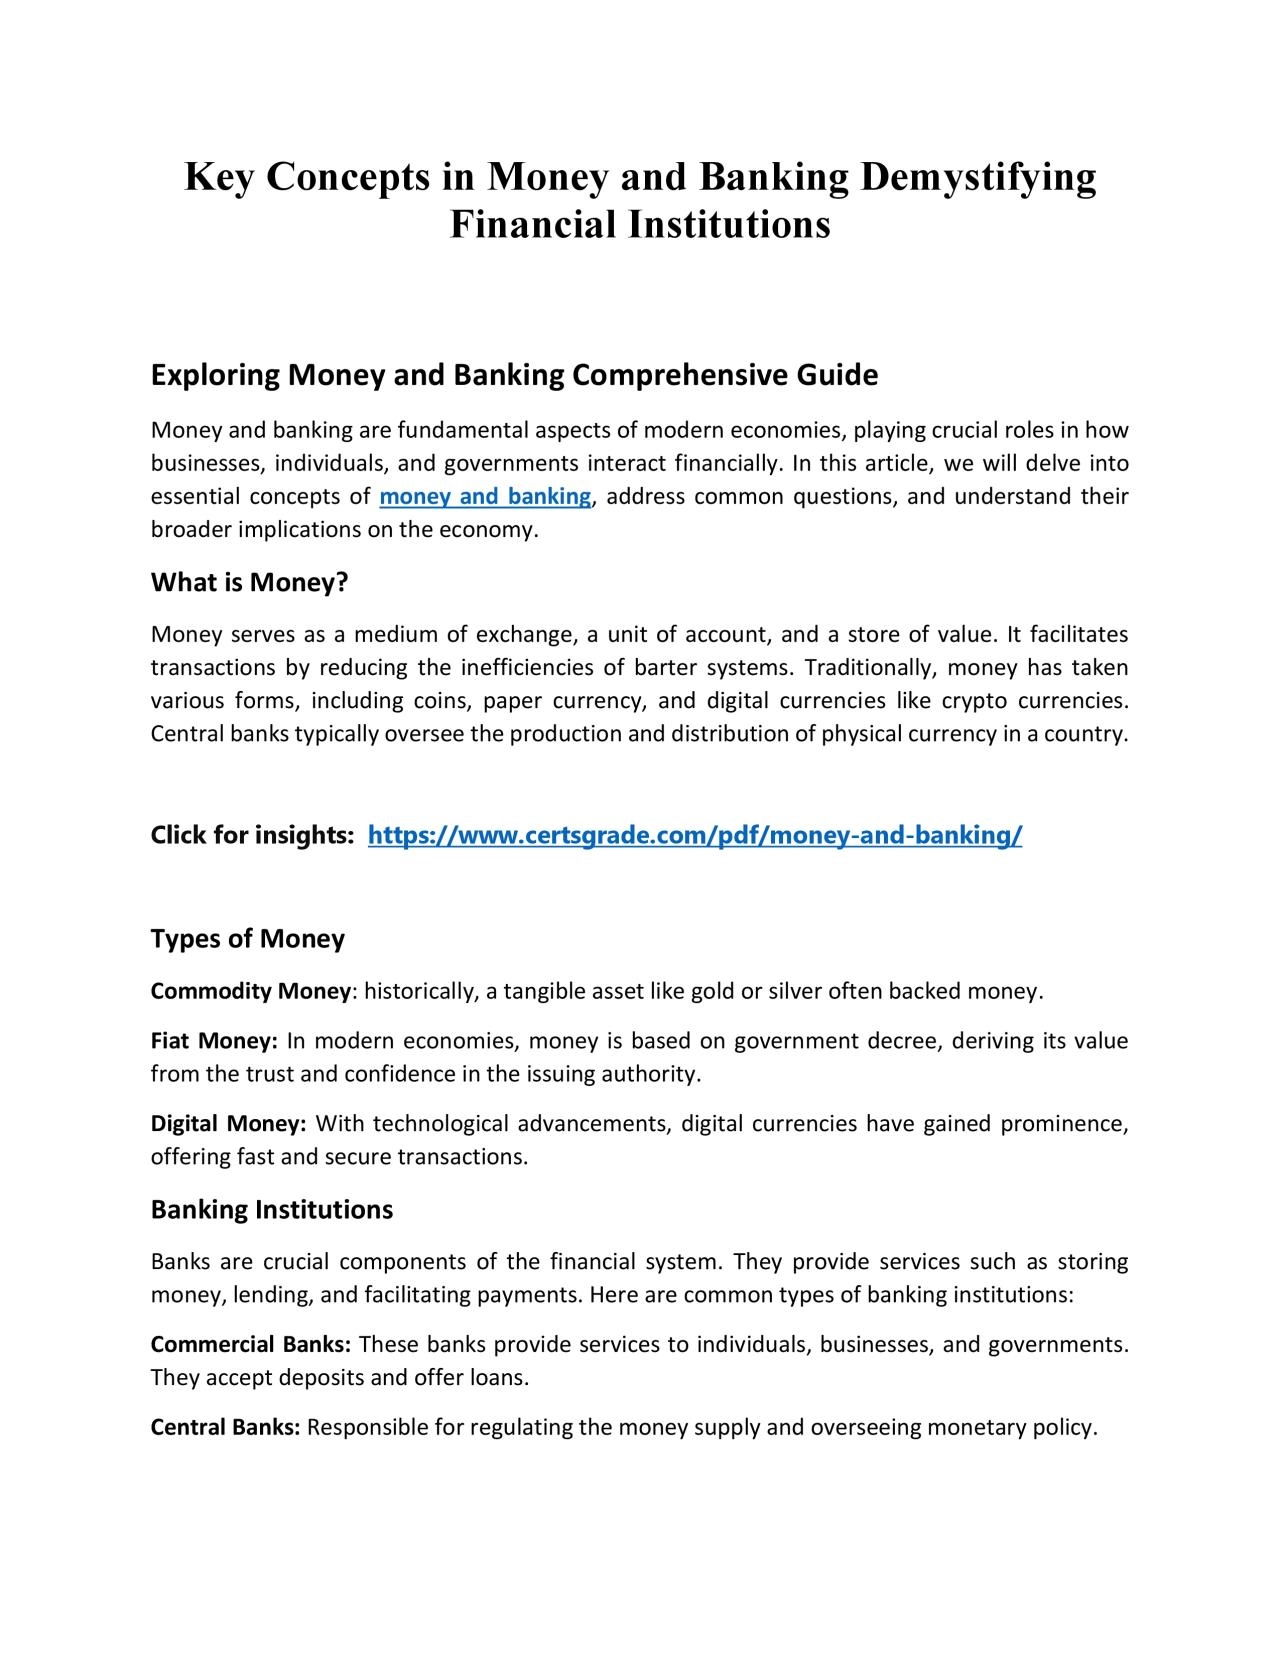 Key Concepts in Money and Banking Demystifying Financial Institutions